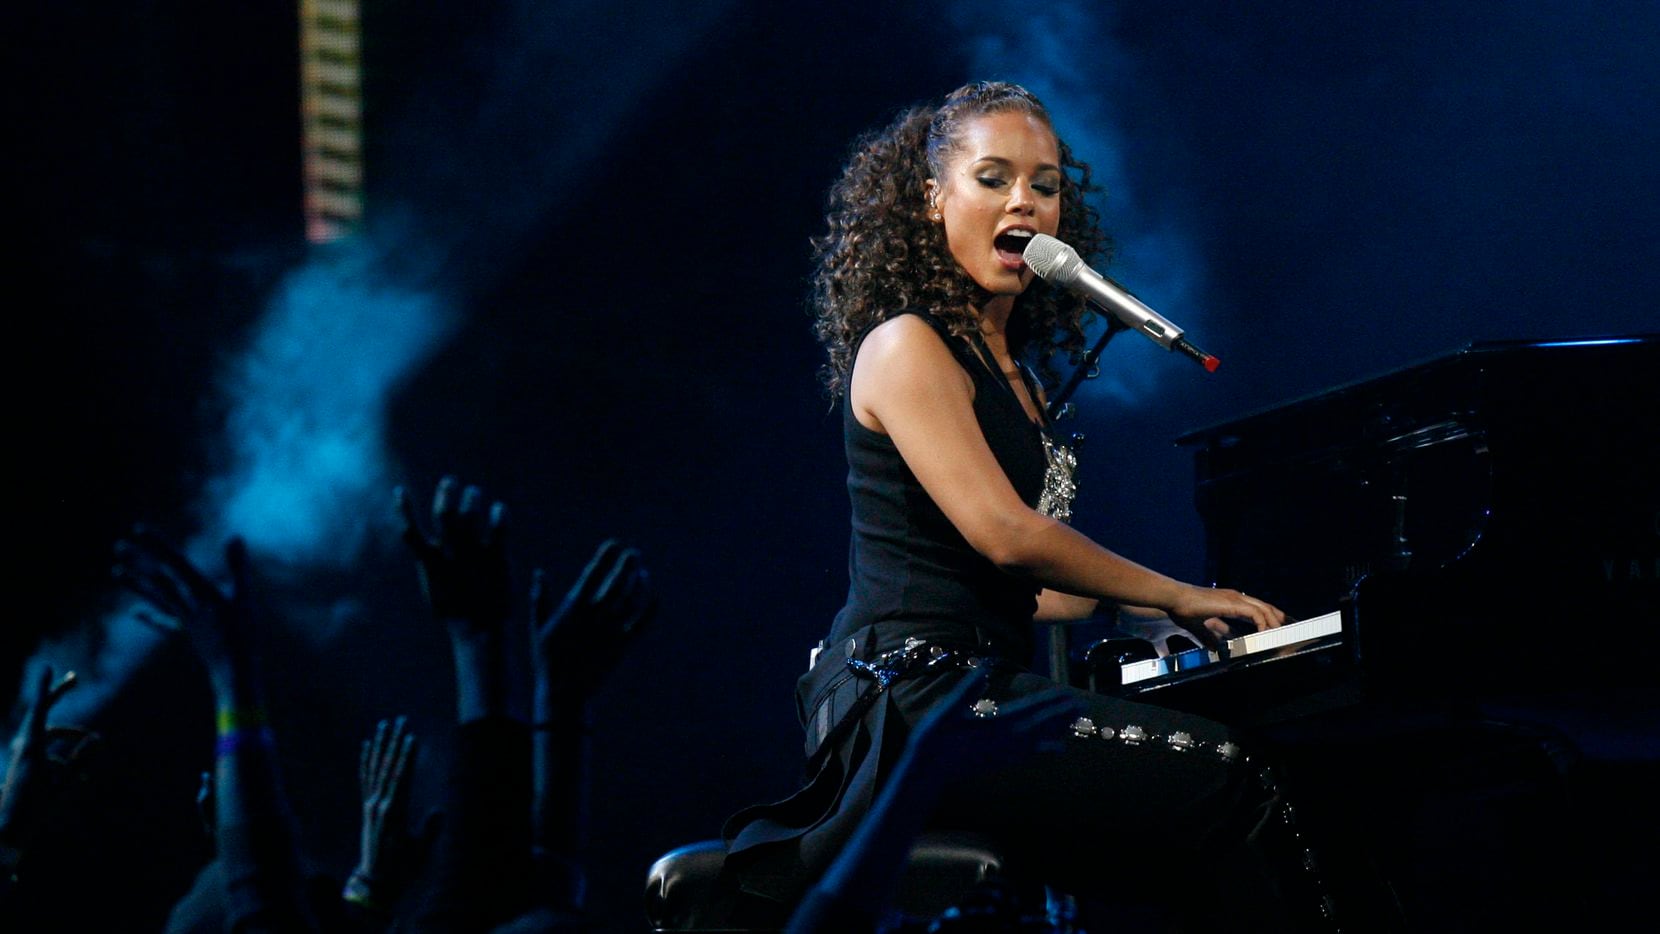 Alicia Keys performed before more than 108,000 fans at halftime during the NBA All-Star game at Cowboys Stadium in Arlington on Feb. 14, 2010.